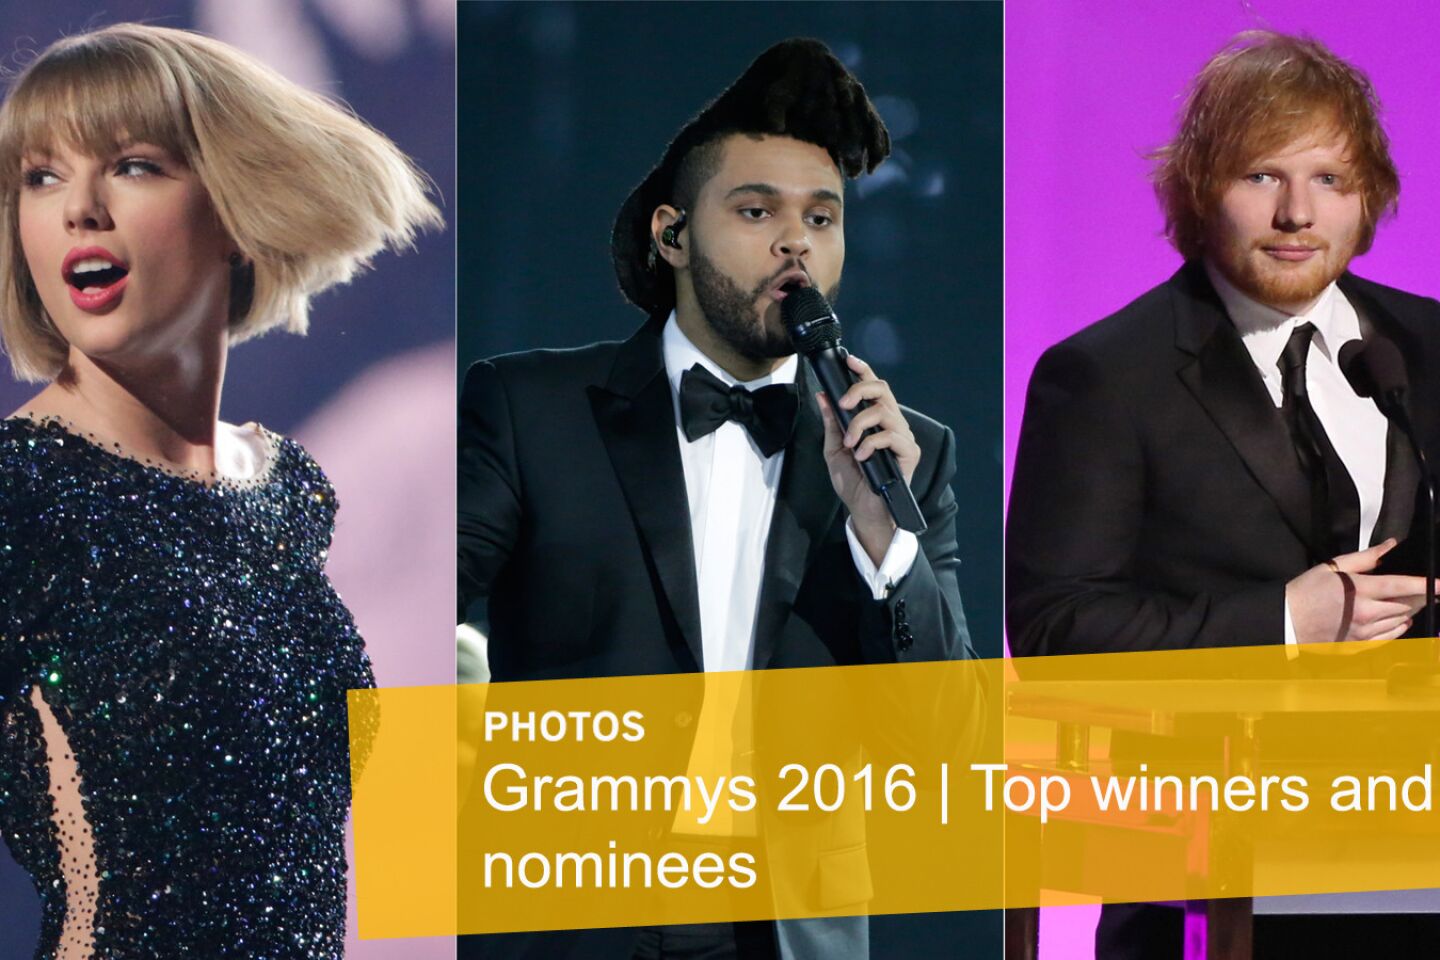 Grammys 2016: Top winners and nominees